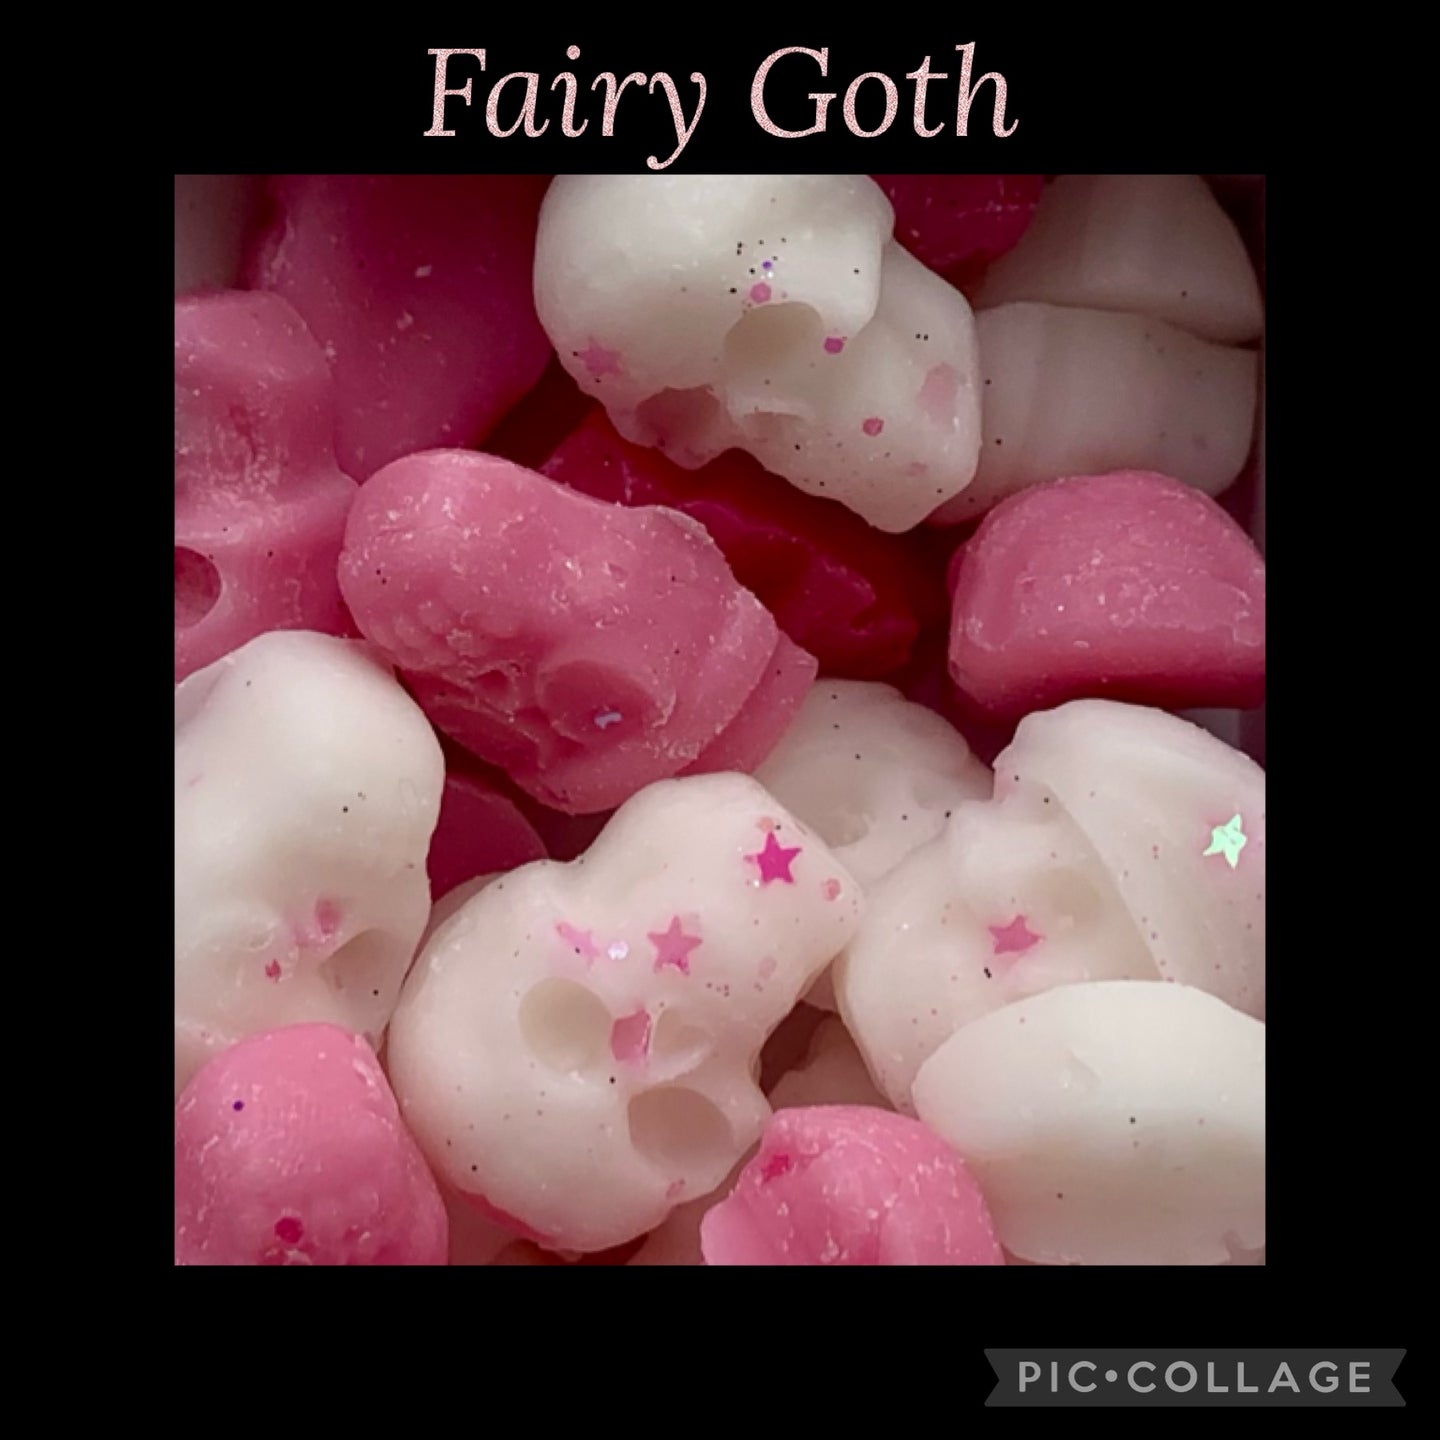 Fairy Goth Candle & Melts